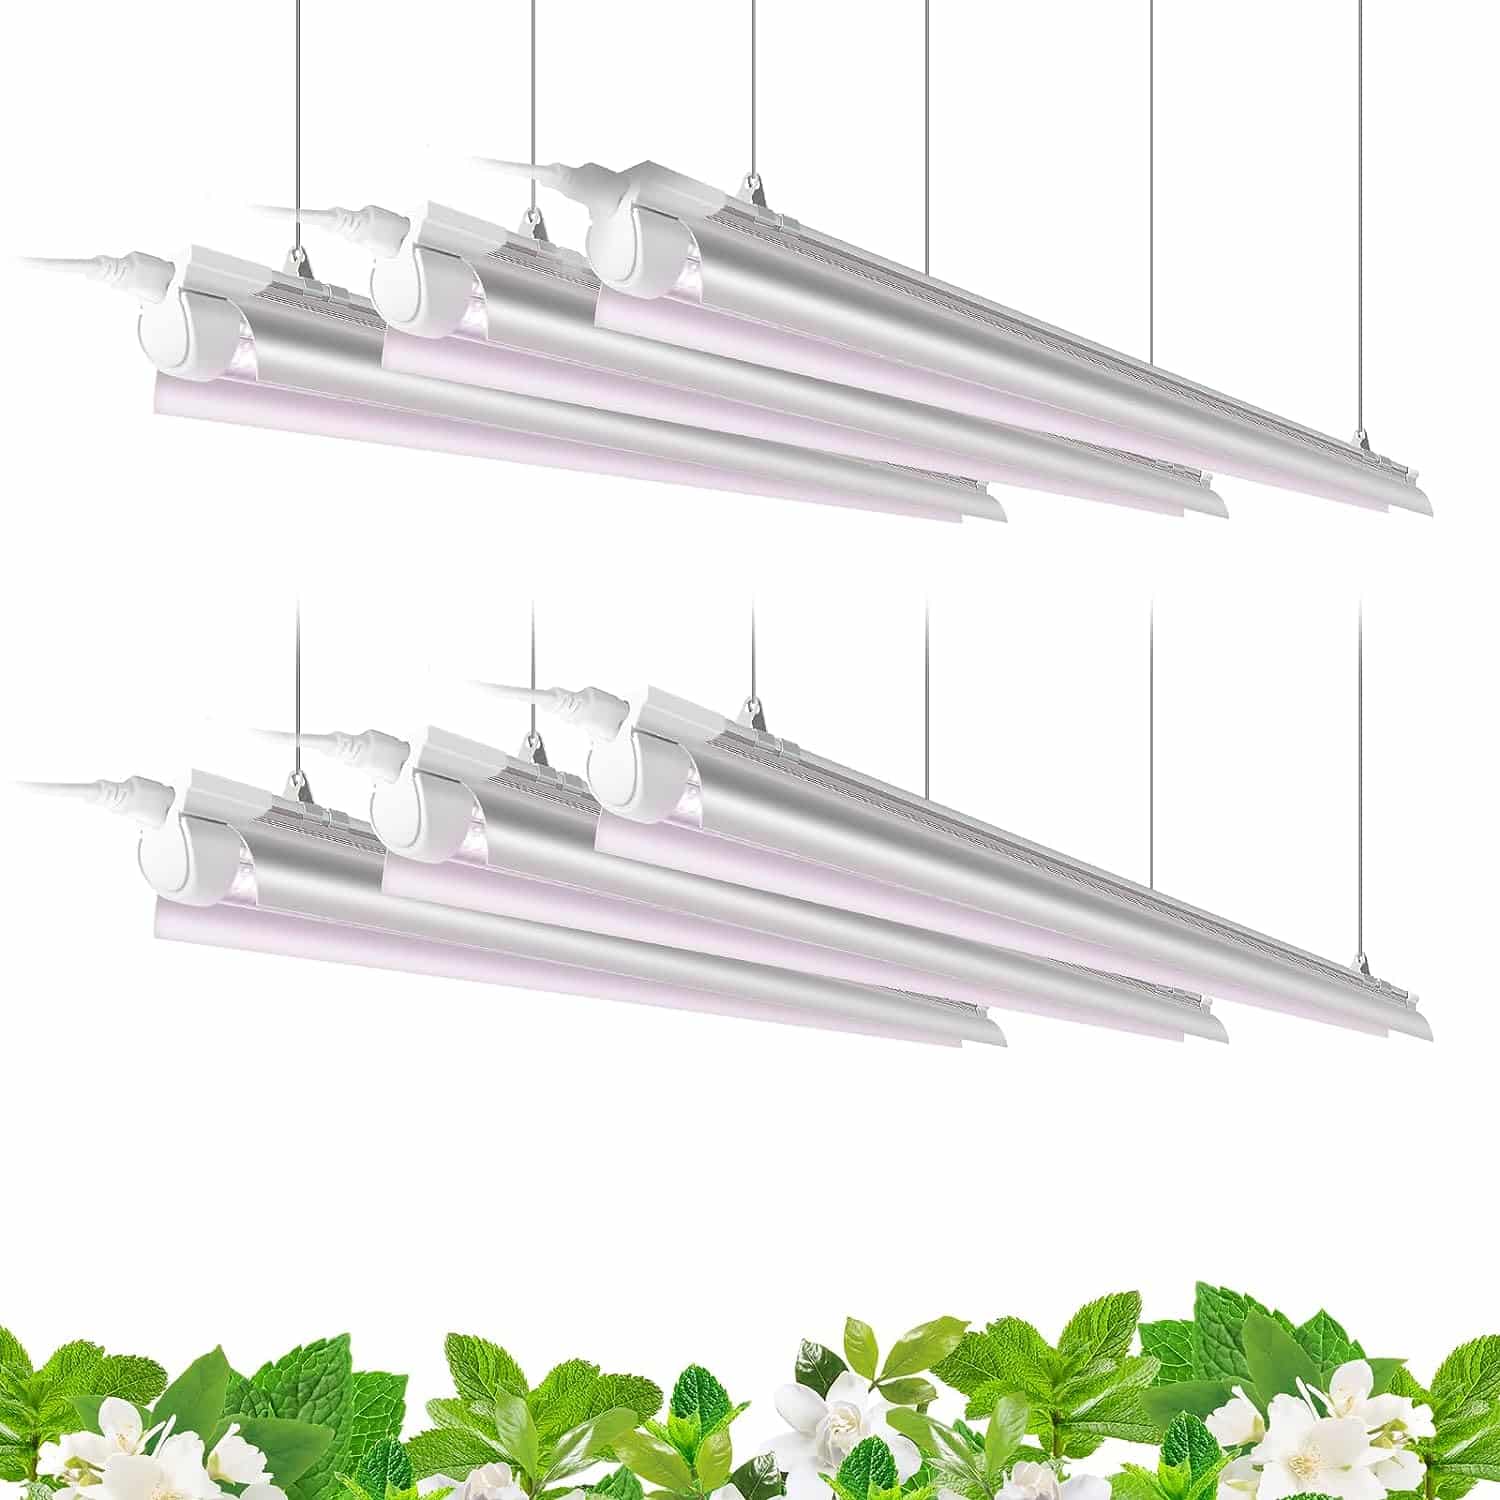 Barrina 4FT T8 Plant Grow Light, 252W(6 x 42W, 1400W Equivalent), Full Spectrum, LED Growing Lamp Fixture for Indoor Plant Growing, with ON/Off Switch  V-Shaped Reflector, Pinkish White, 6-Pack